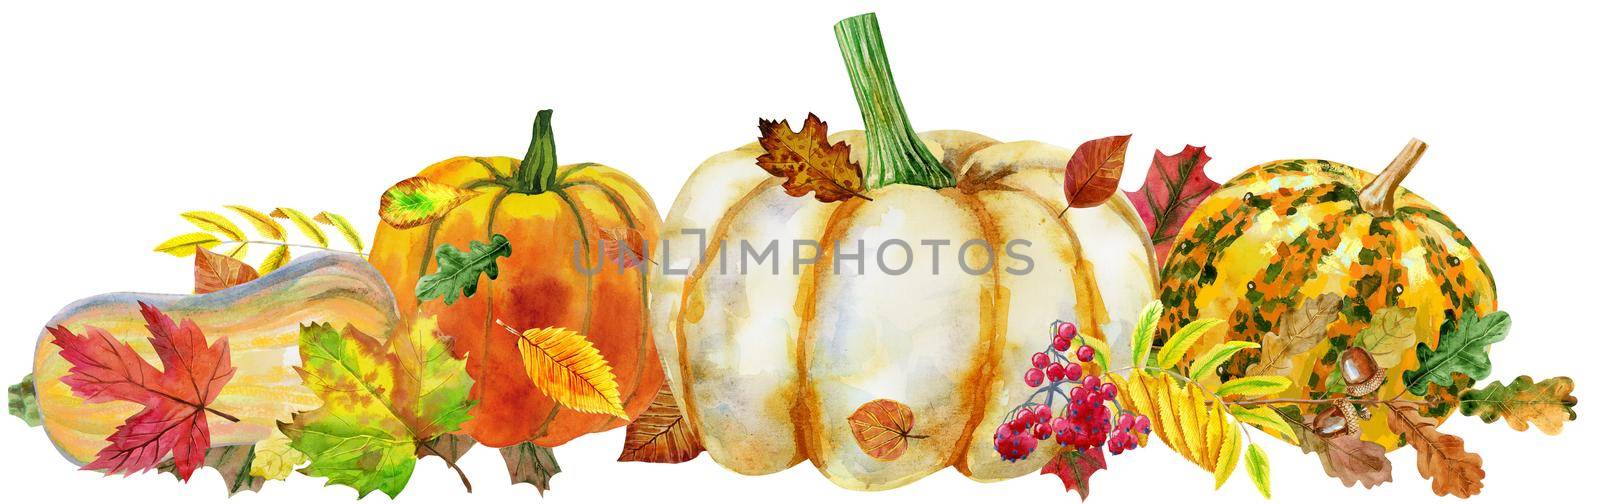 Horizontal composition of pumpkins and autumn leaves by NataOmsk